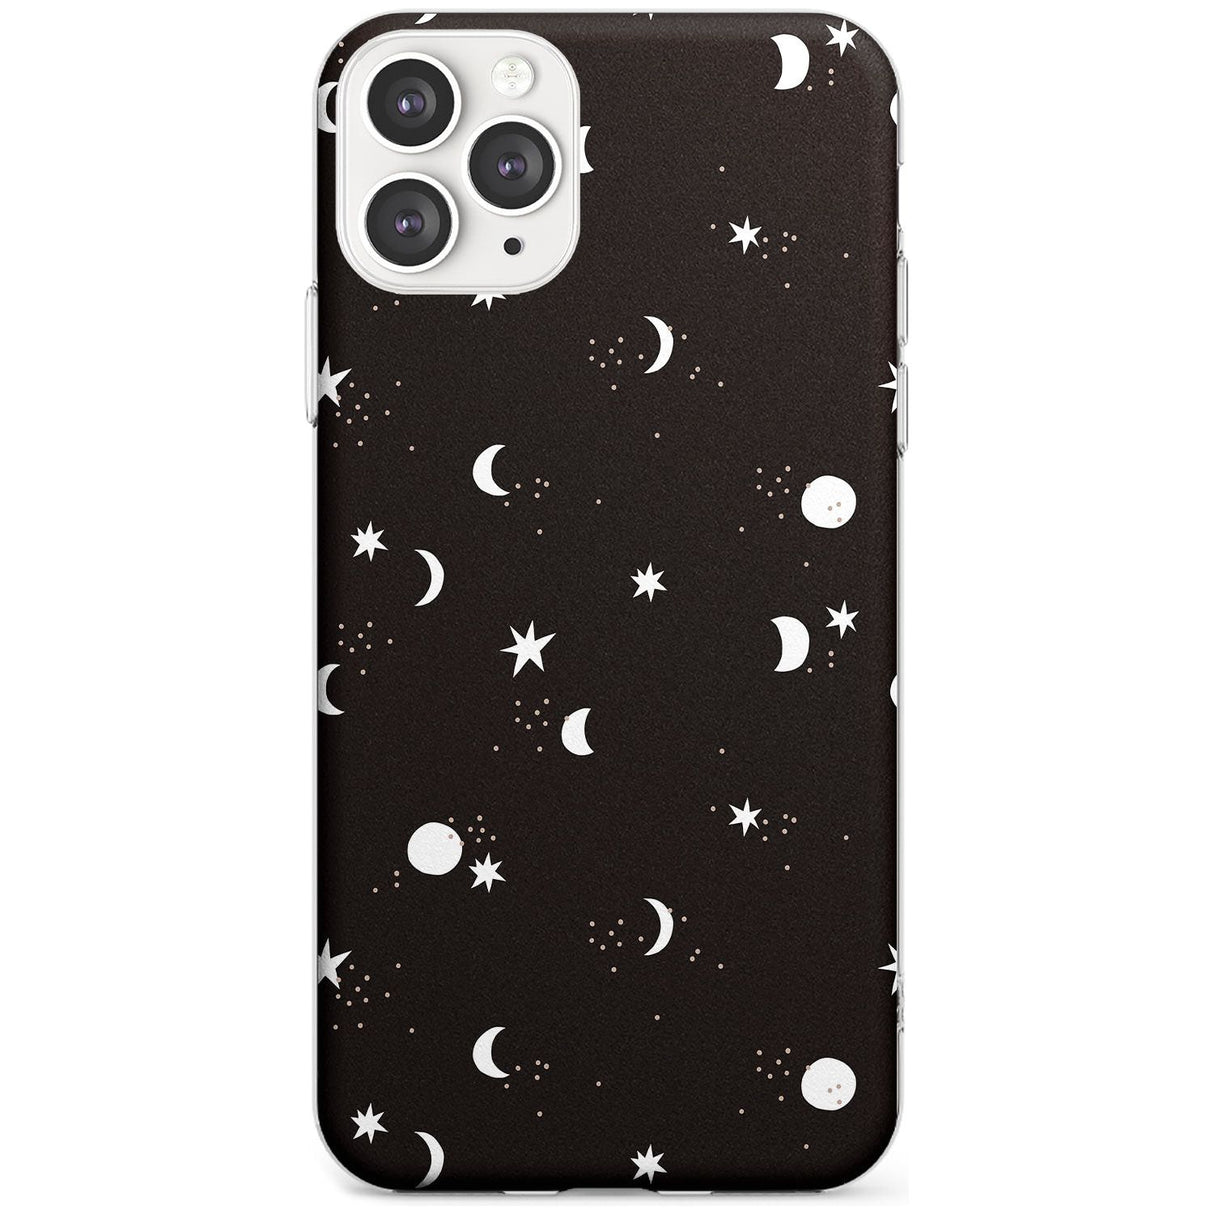 Funky Moons & Stars Phone Case iPhone 11 Pro Max / Clear Case,iPhone 11 Pro / Clear Case,iPhone 12 Pro Max / Clear Case,iPhone 12 Pro / Clear Case Blanc Space